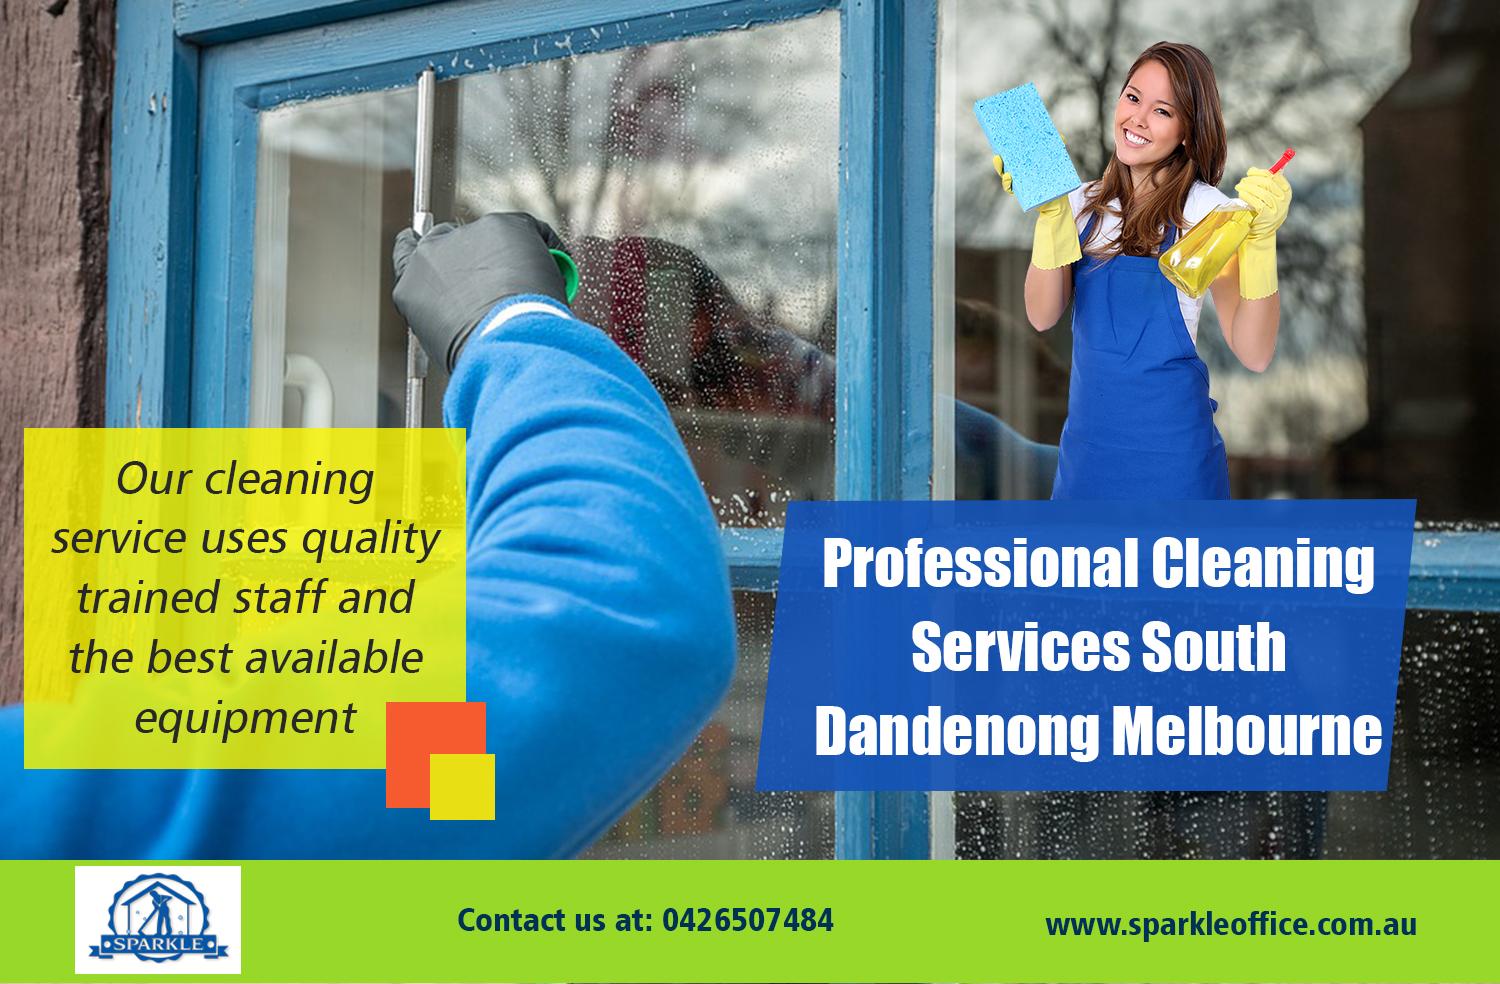 Professional Cleaning Services South Dandenong Melbourne